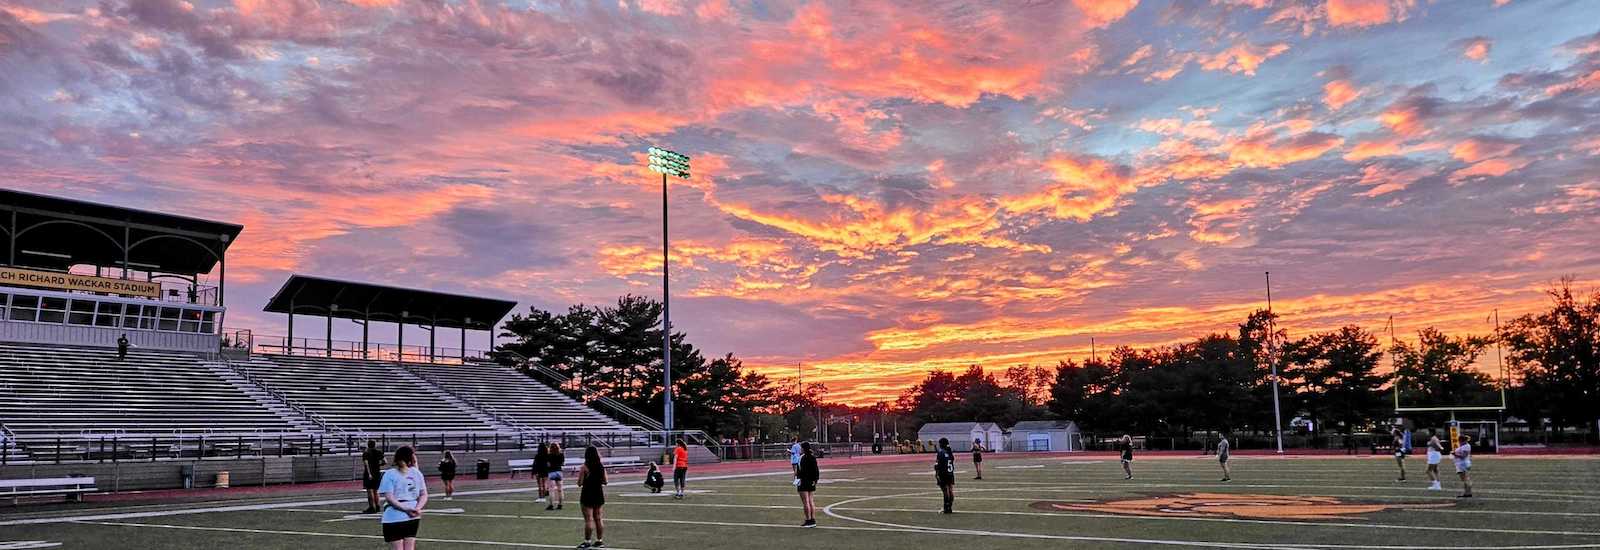 Dramatic sunset photo over the athletic field with the marching band on the field at Rowan University.